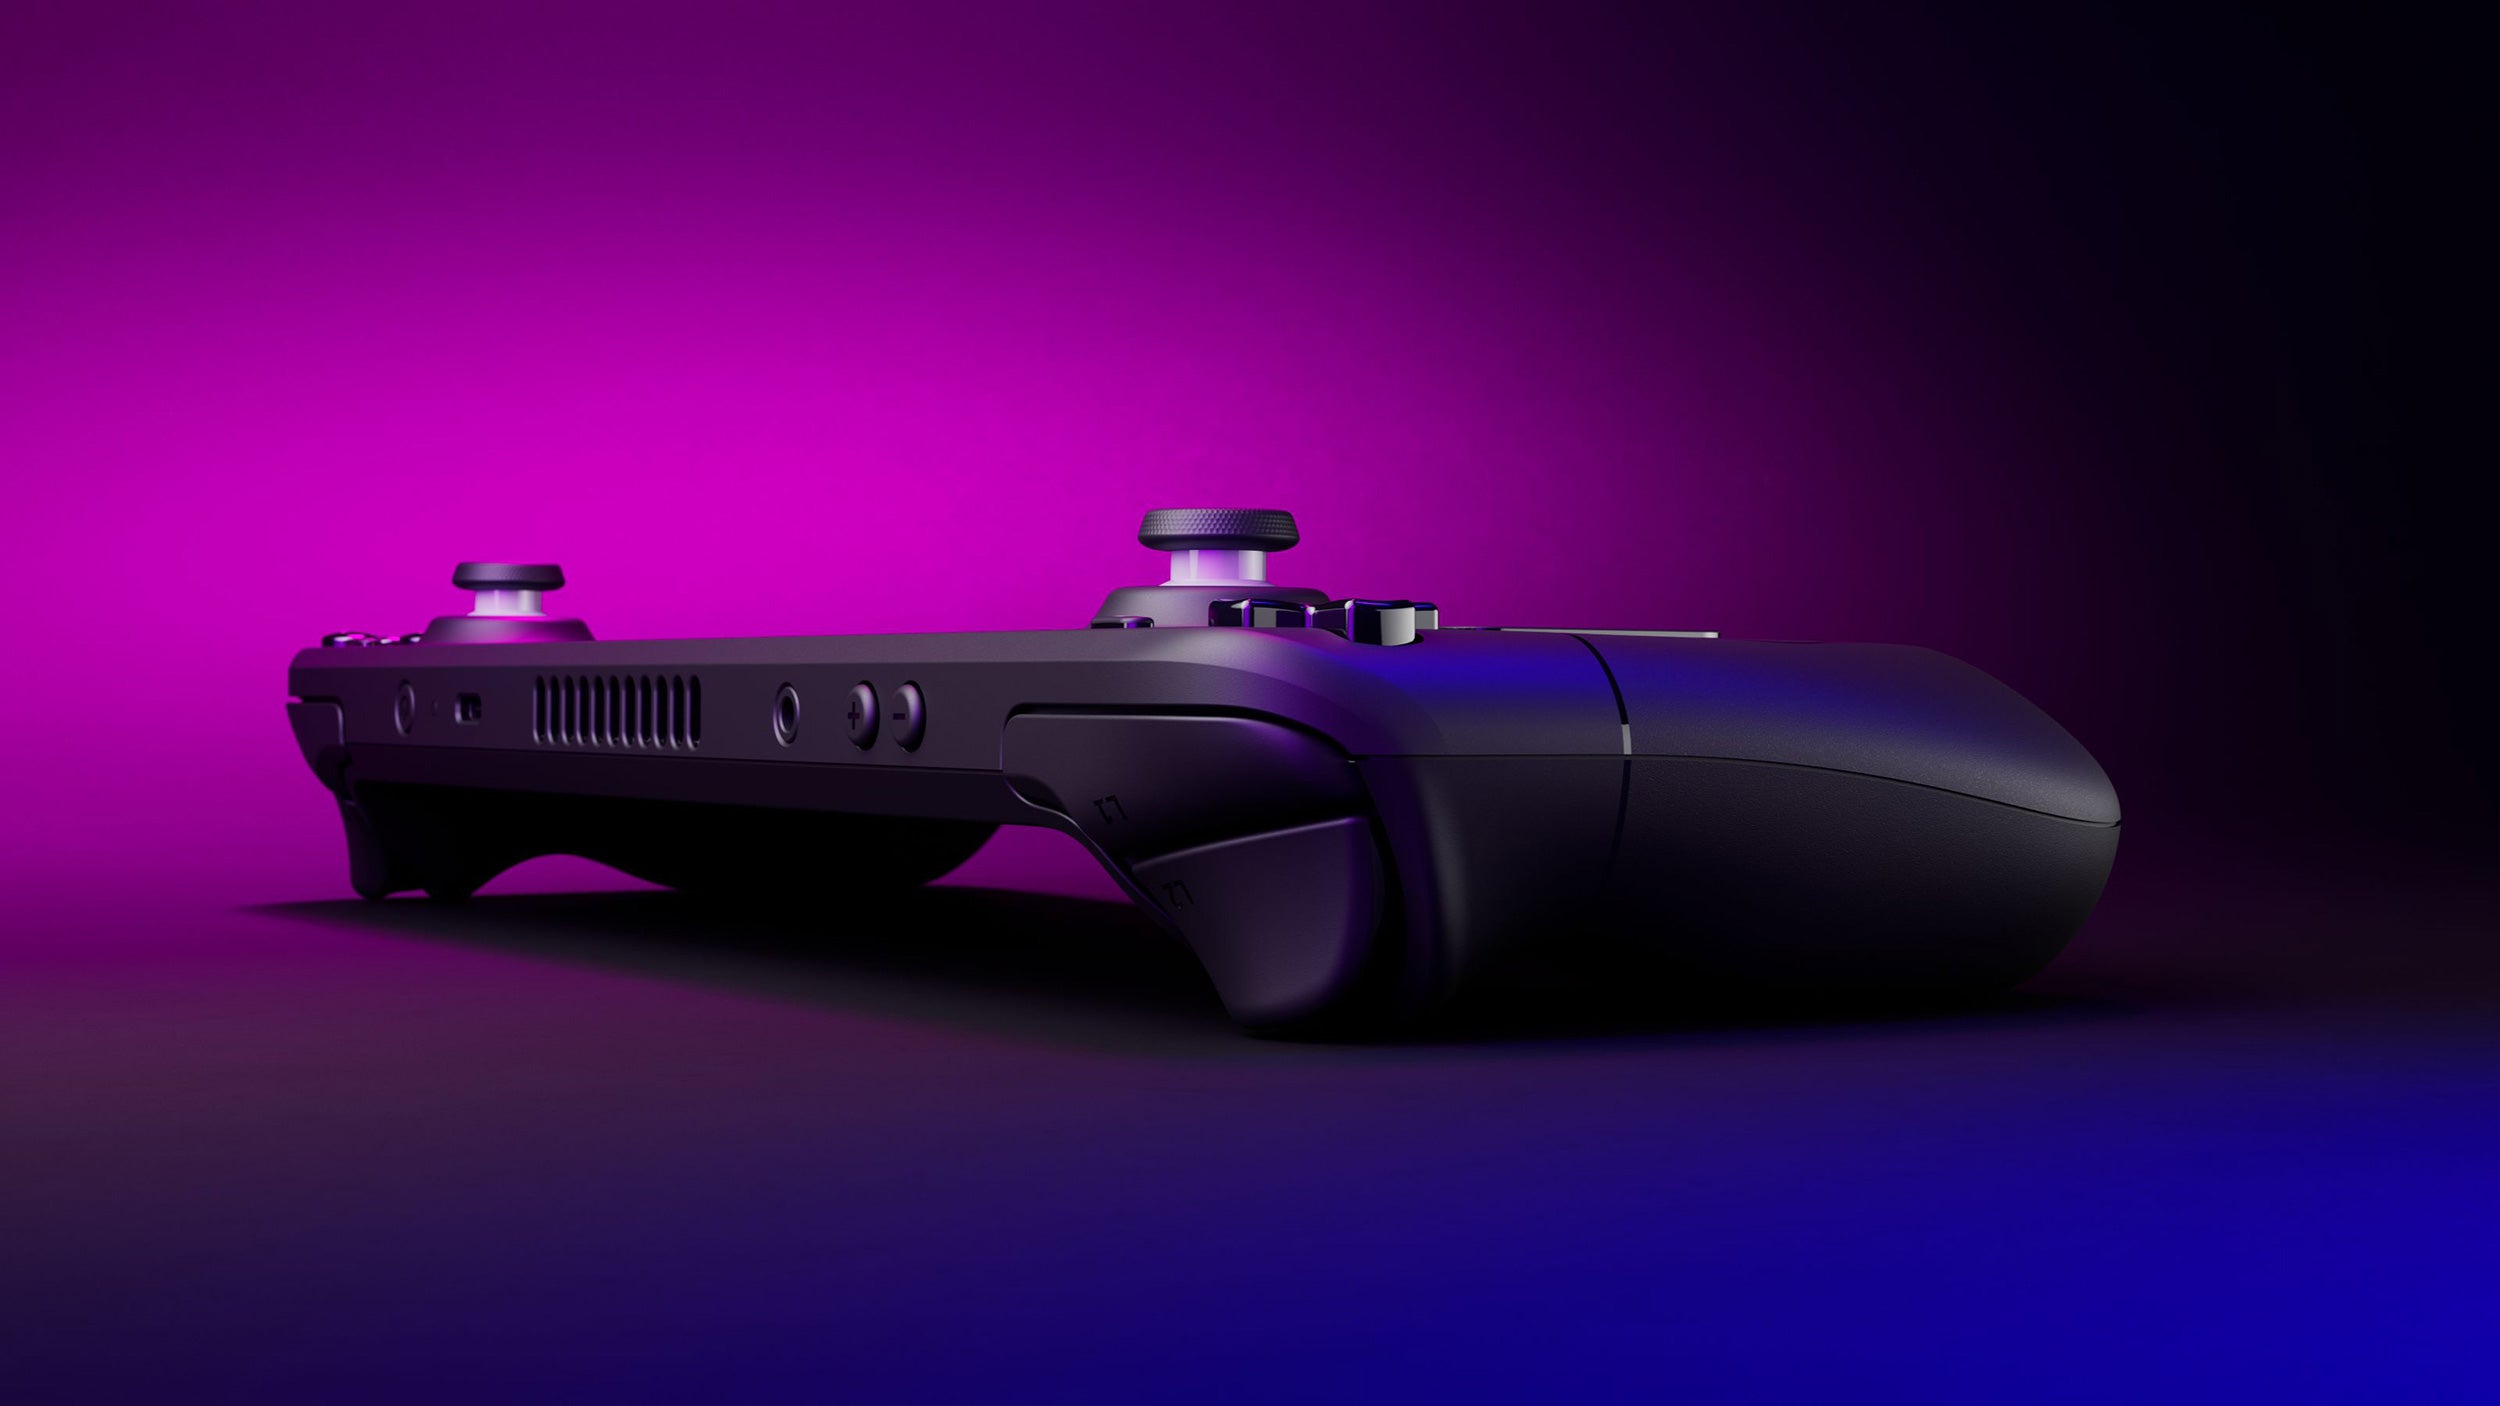 A side view of the Steam Deck from an official render.